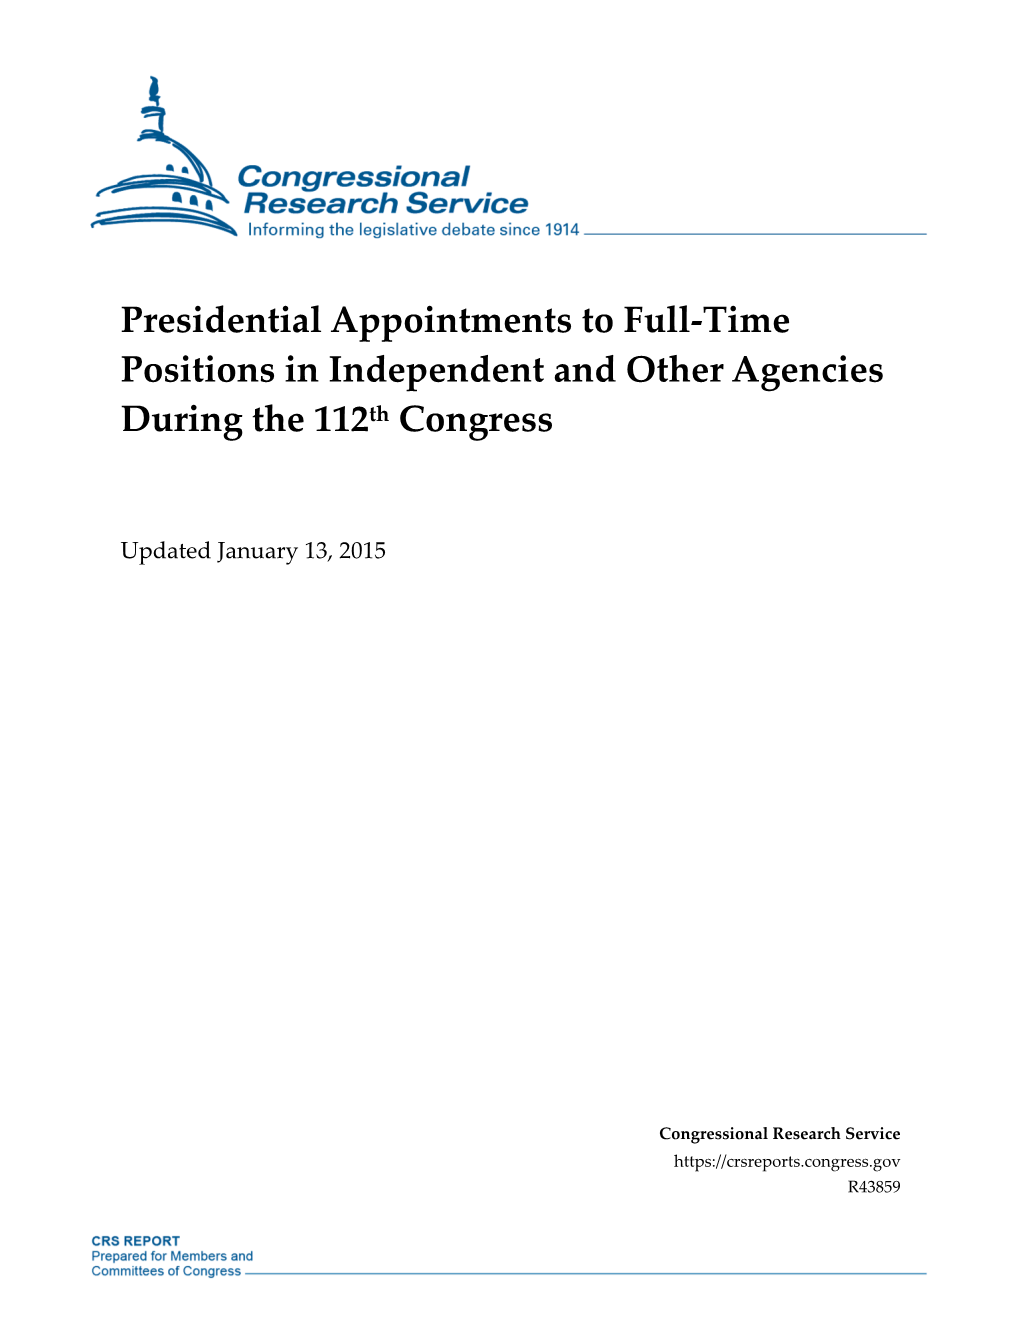 Presidential Appointments to Full-Time Positions in Independent and Other Agencies During the 112Th Congress